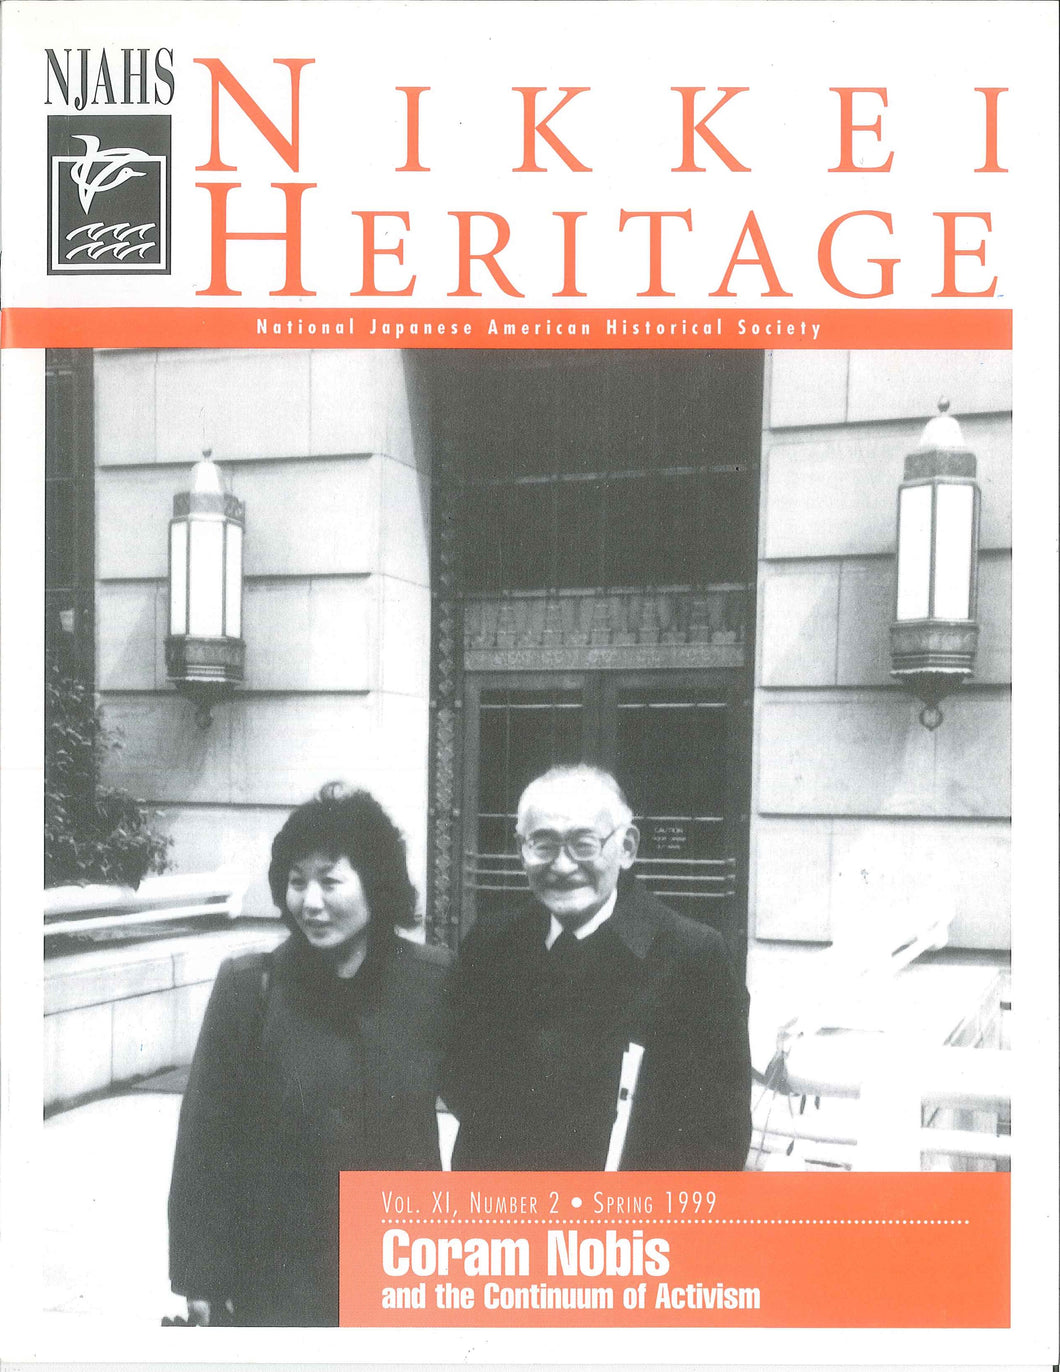 Nikkei Heritage - Coram Nobis and the Continuation of Activism